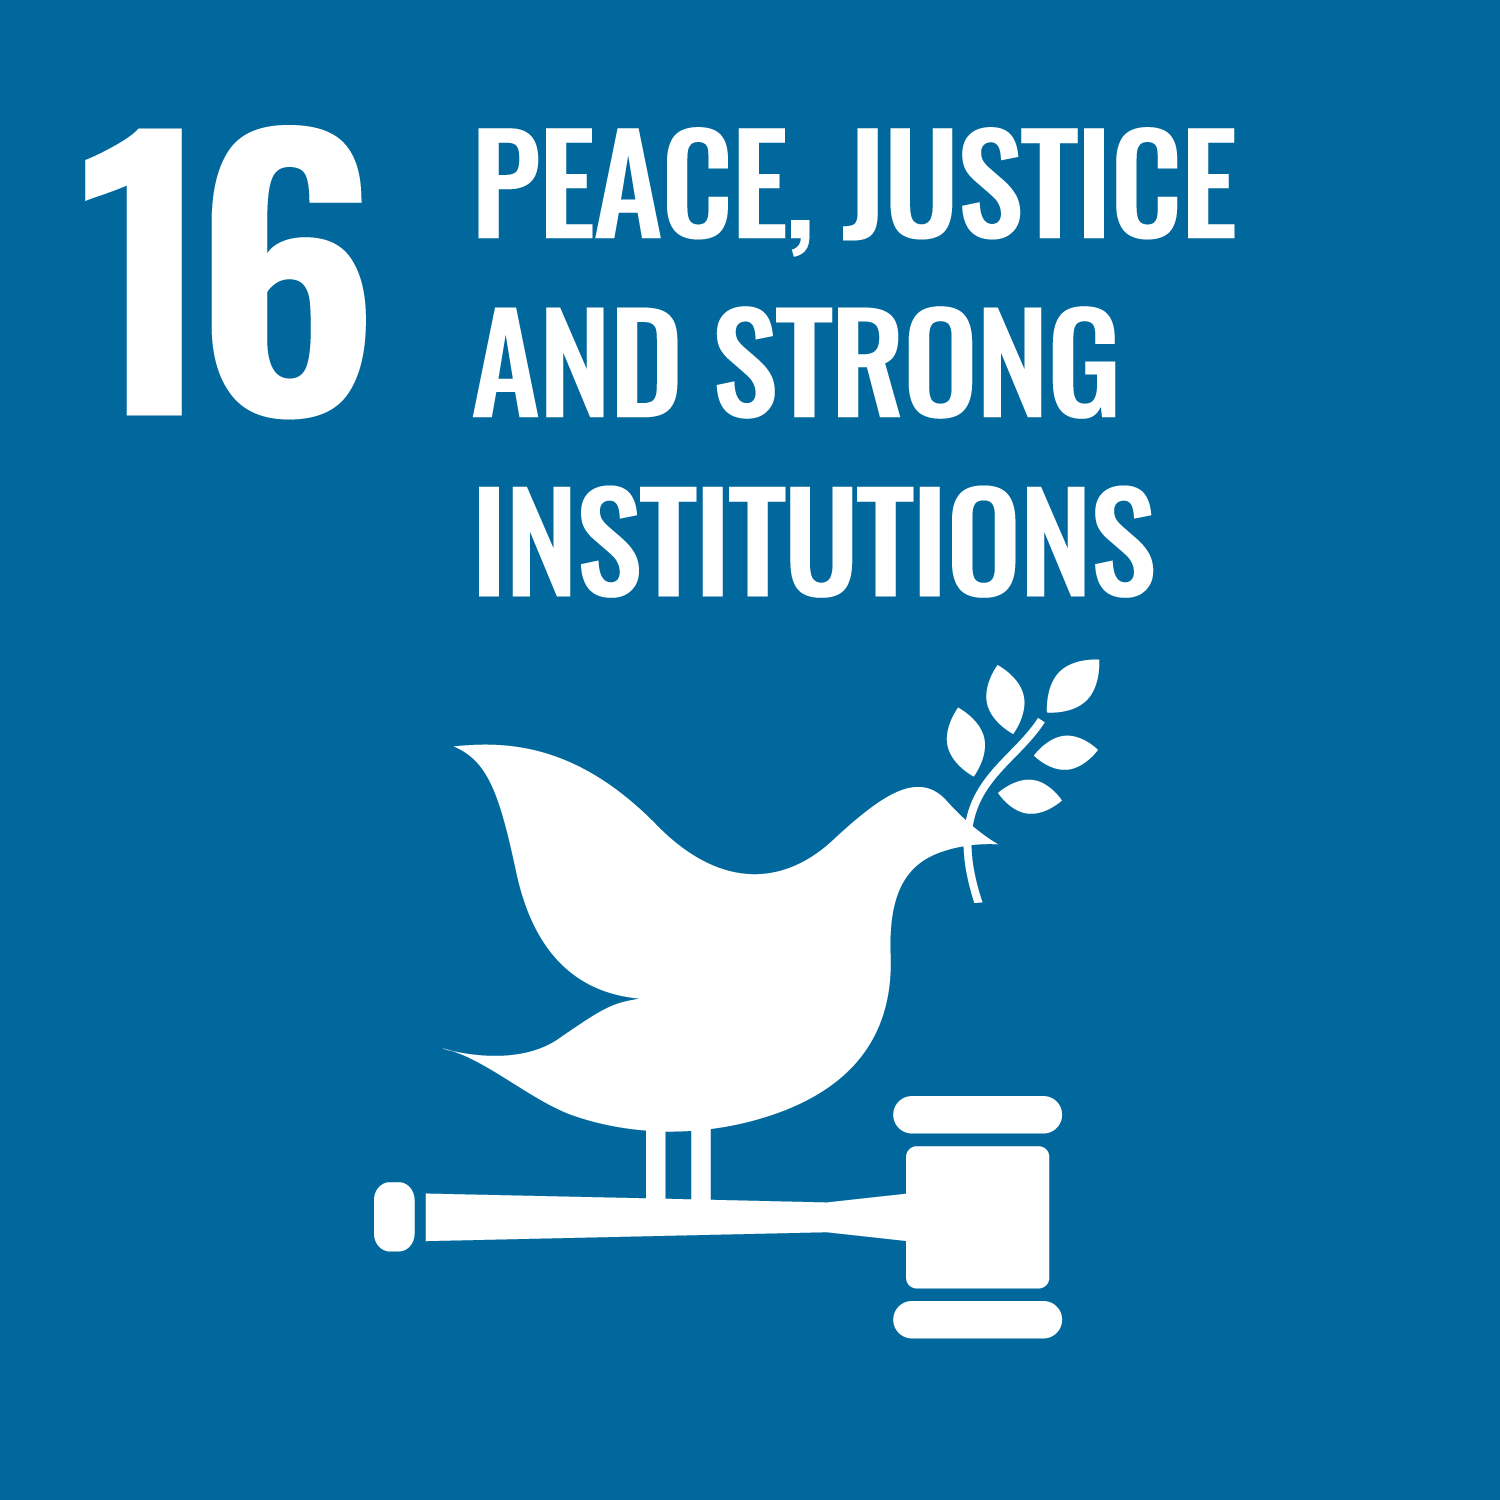 Target 16．Peace, justice and strong institutions